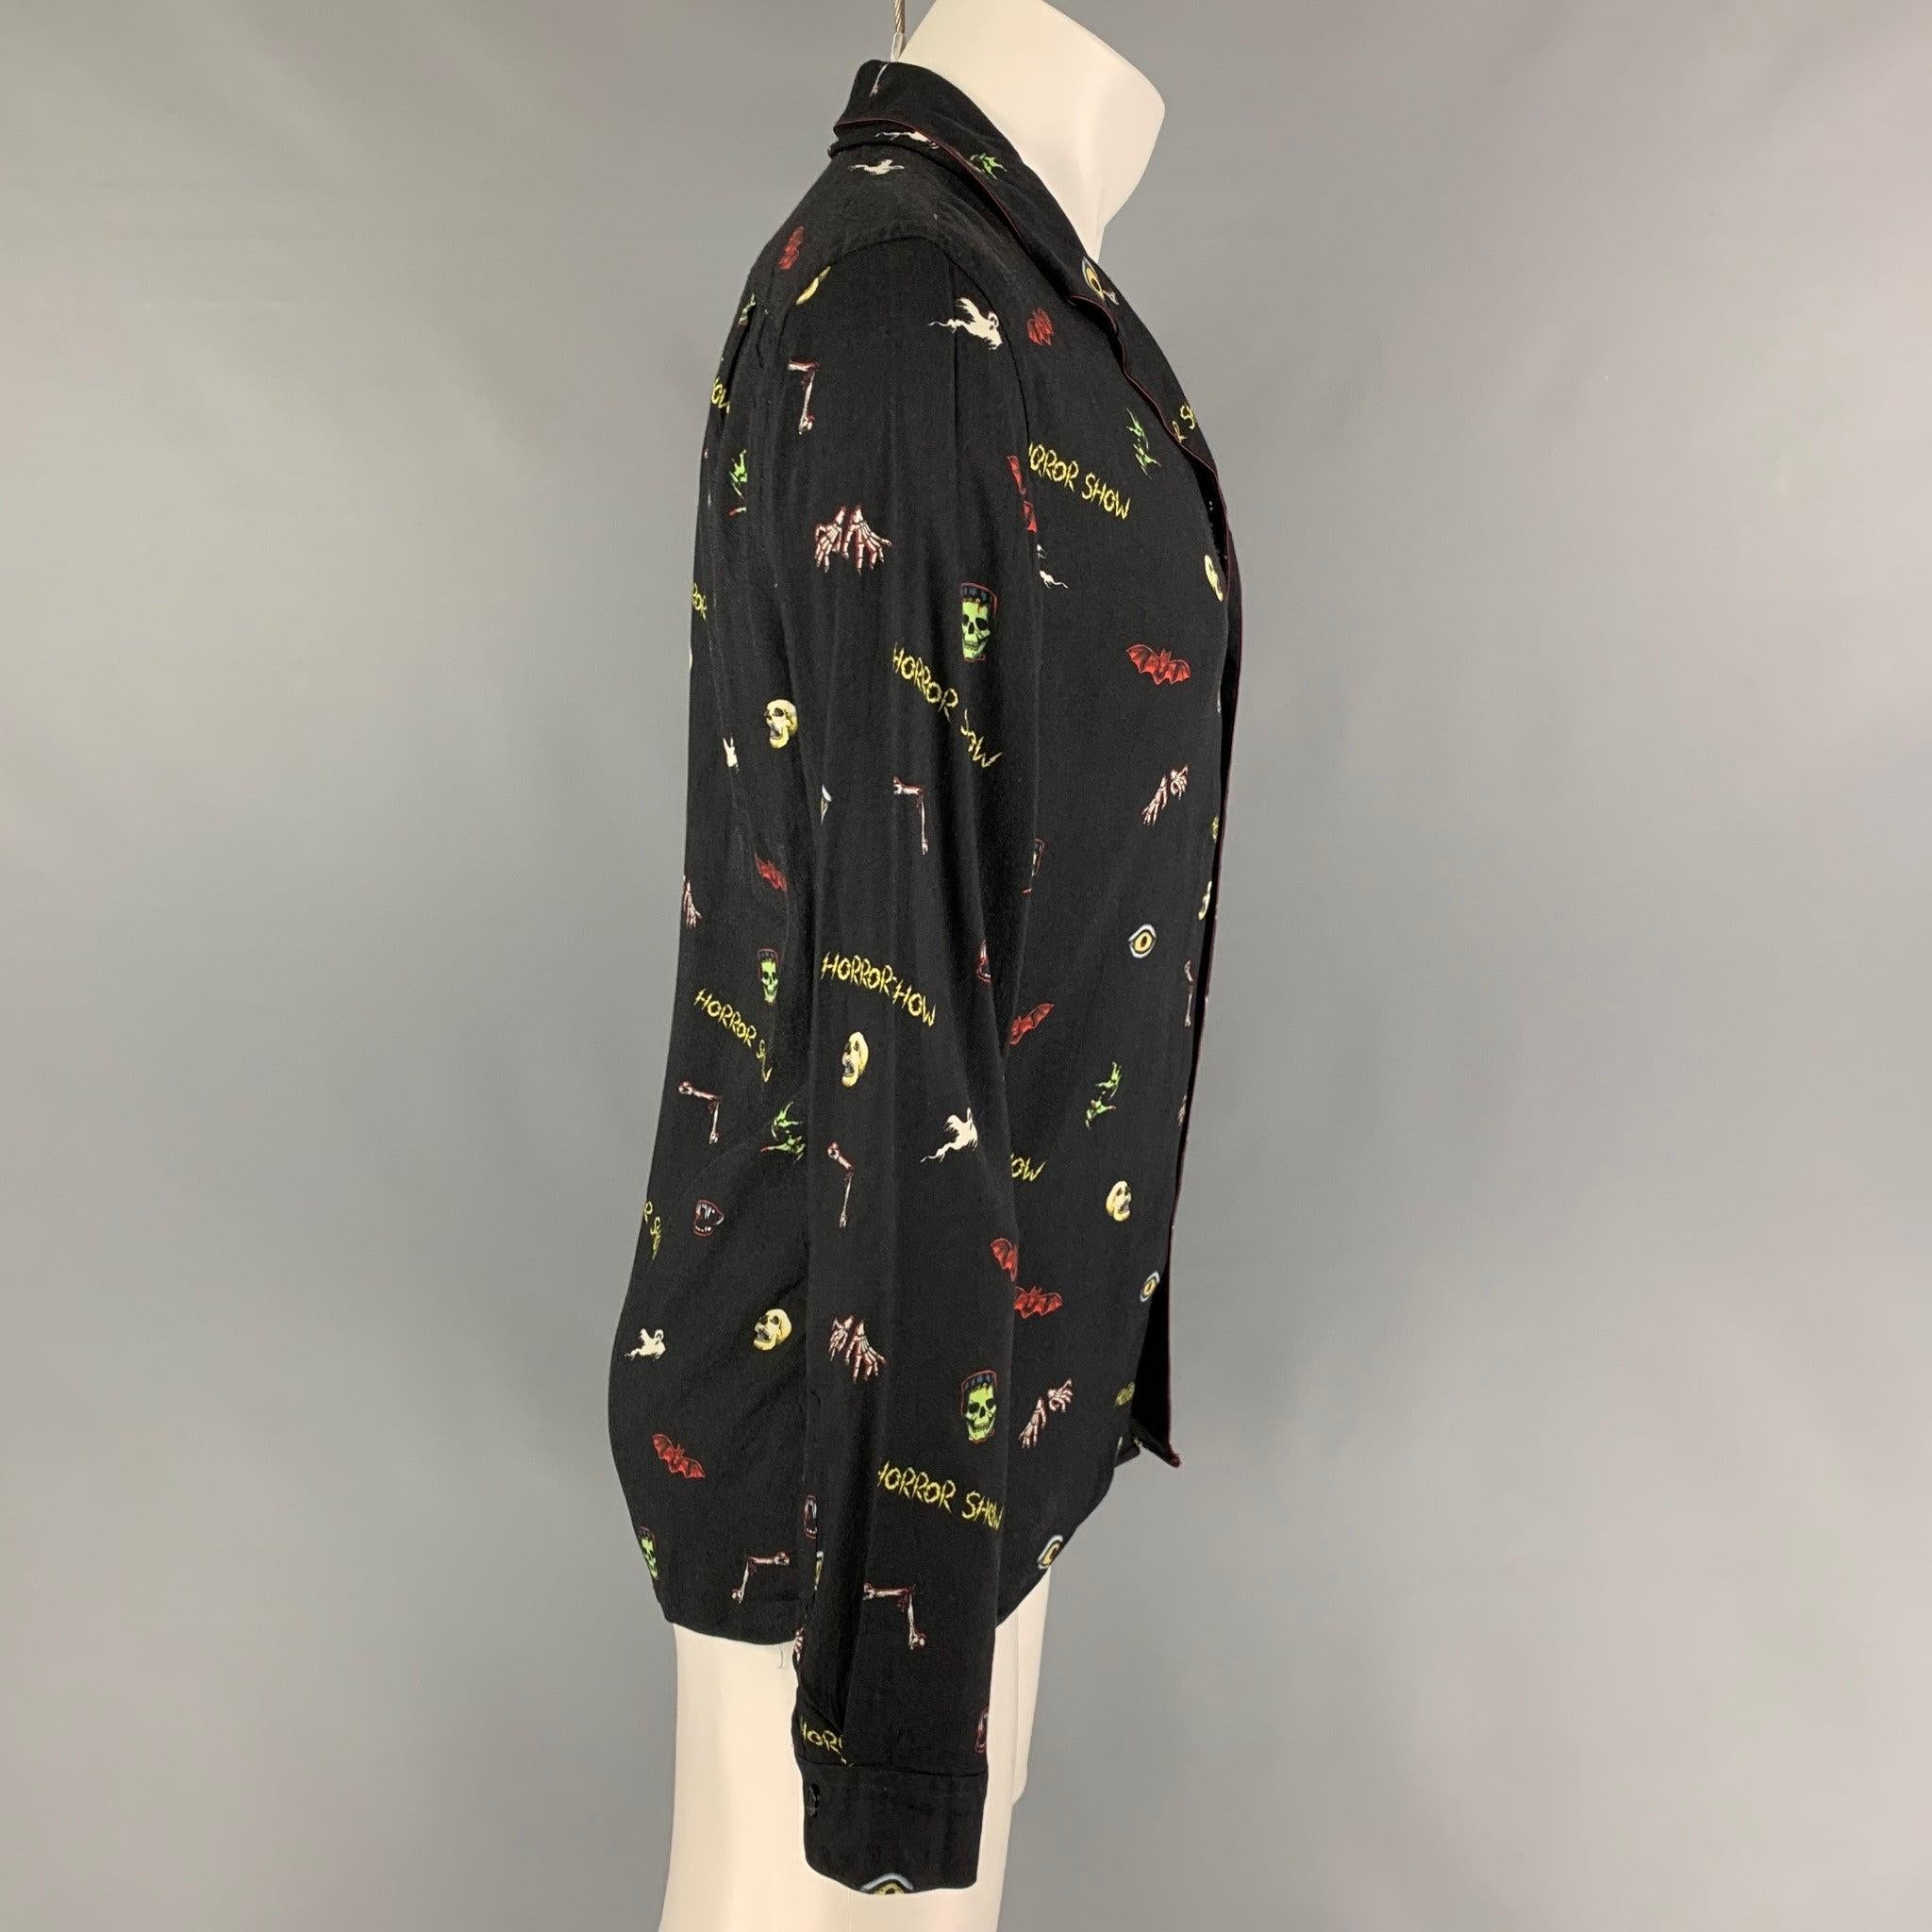 THE KOOPLES long sleeve shirt comes in a black viscose with a multi-color graphic design featuring a camp collar and a button up closure.
Very Good
Pre-Owned Condition. 

Marked:   S 

Measurements: 
 
Shoulder: 17 inches  Chest: 38 inches  Sleeve: